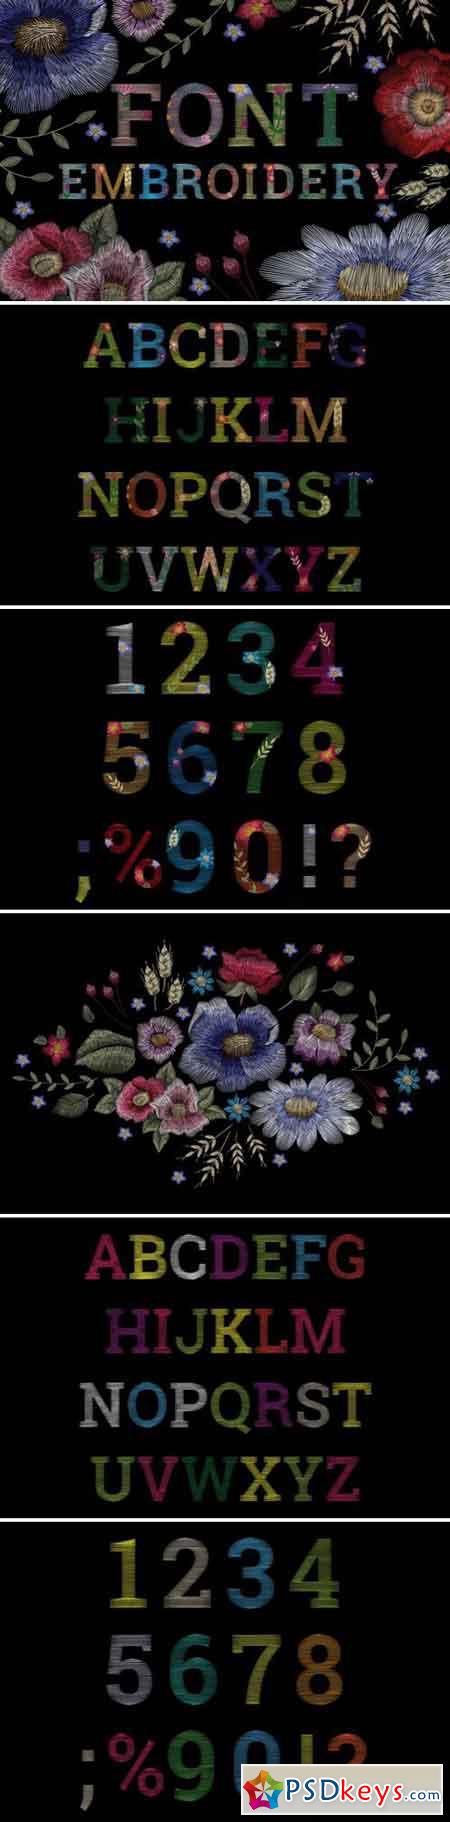 Font flower embroidery 1587910